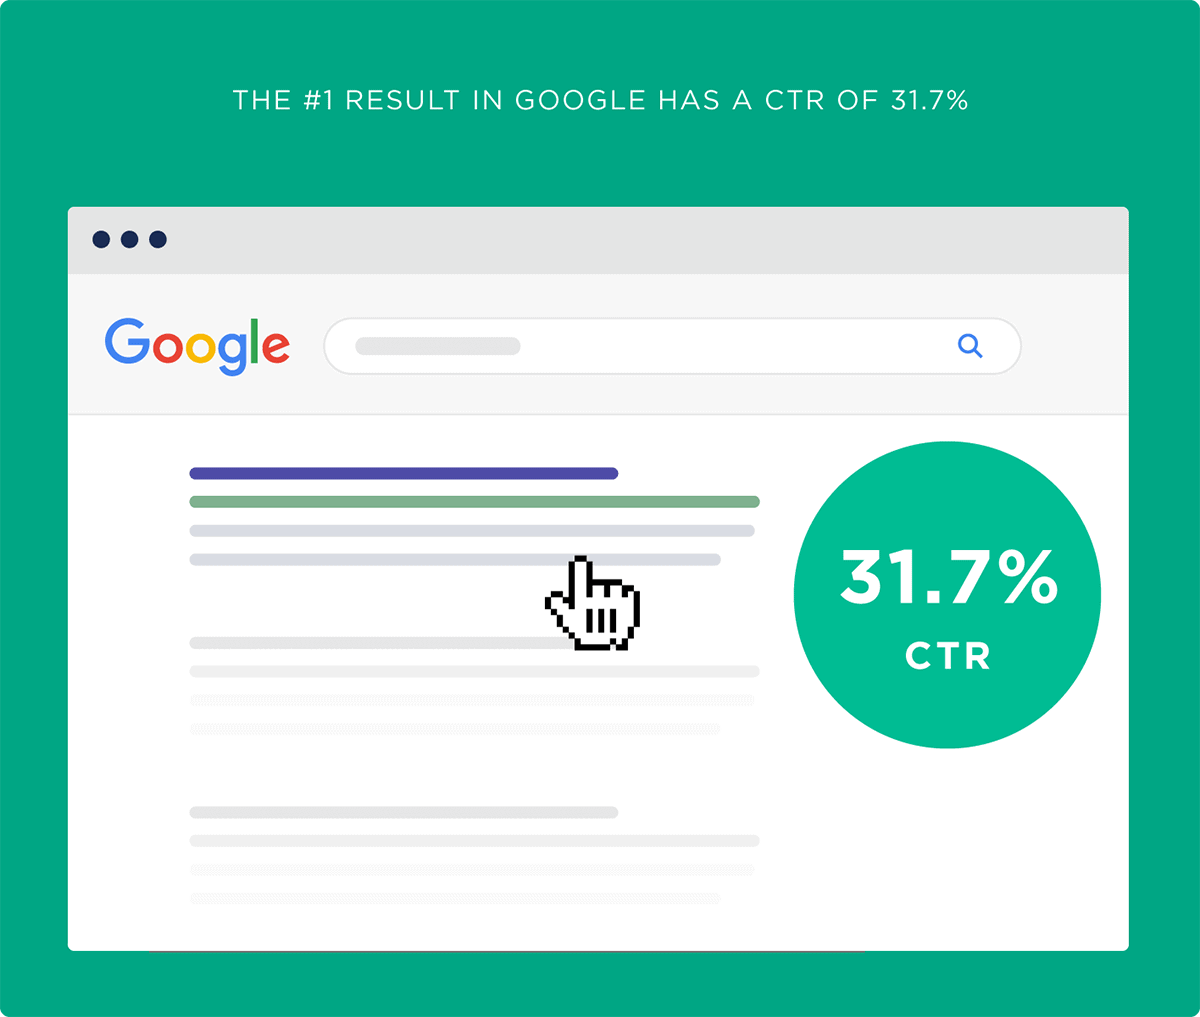 The #1 result in Google has a CTR of 31.7%